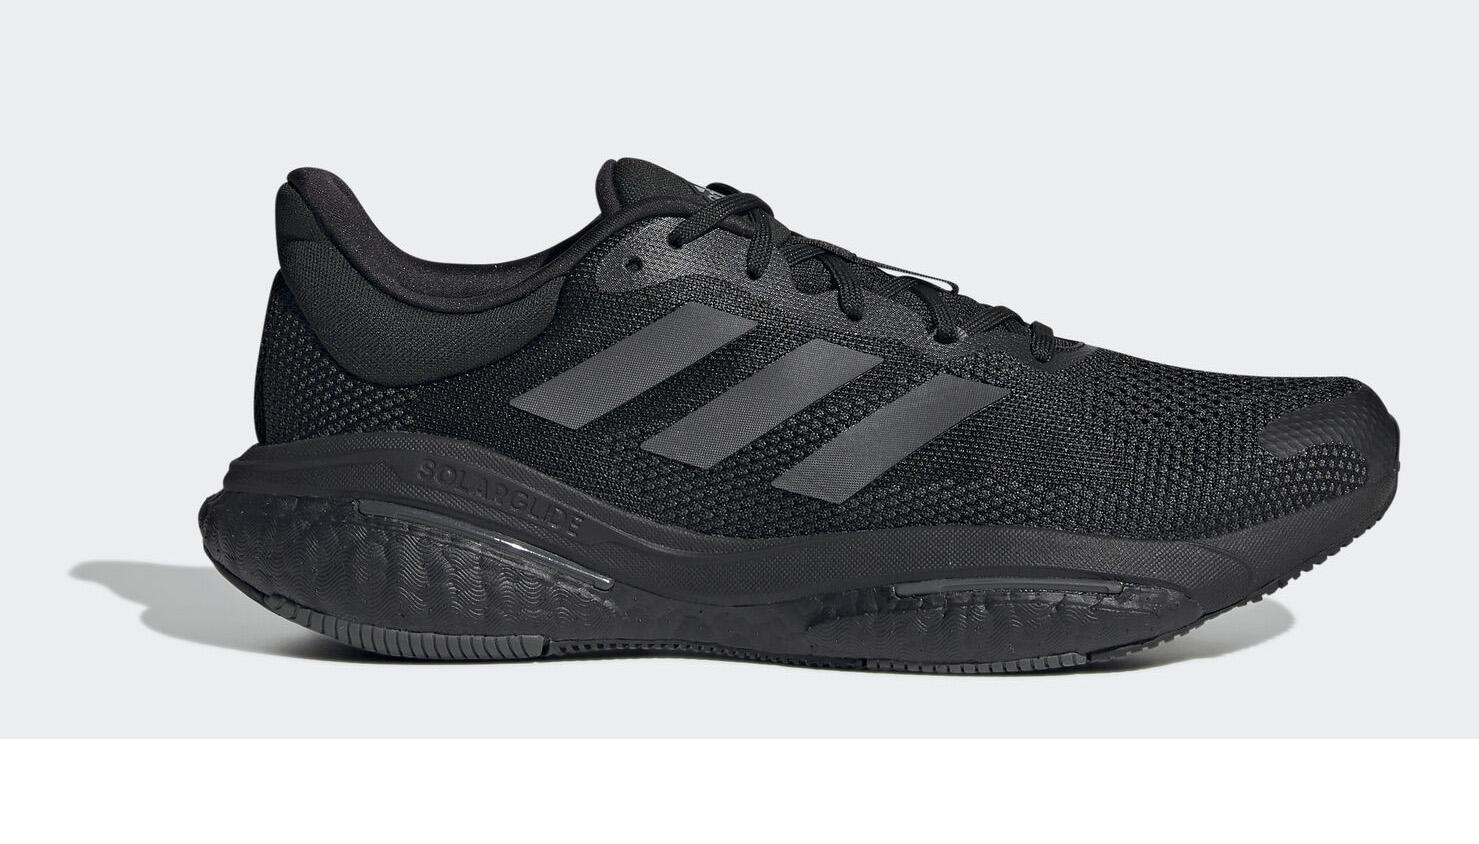 adidas Solarglide 5 Mens Shoes for $37.44 Shipped